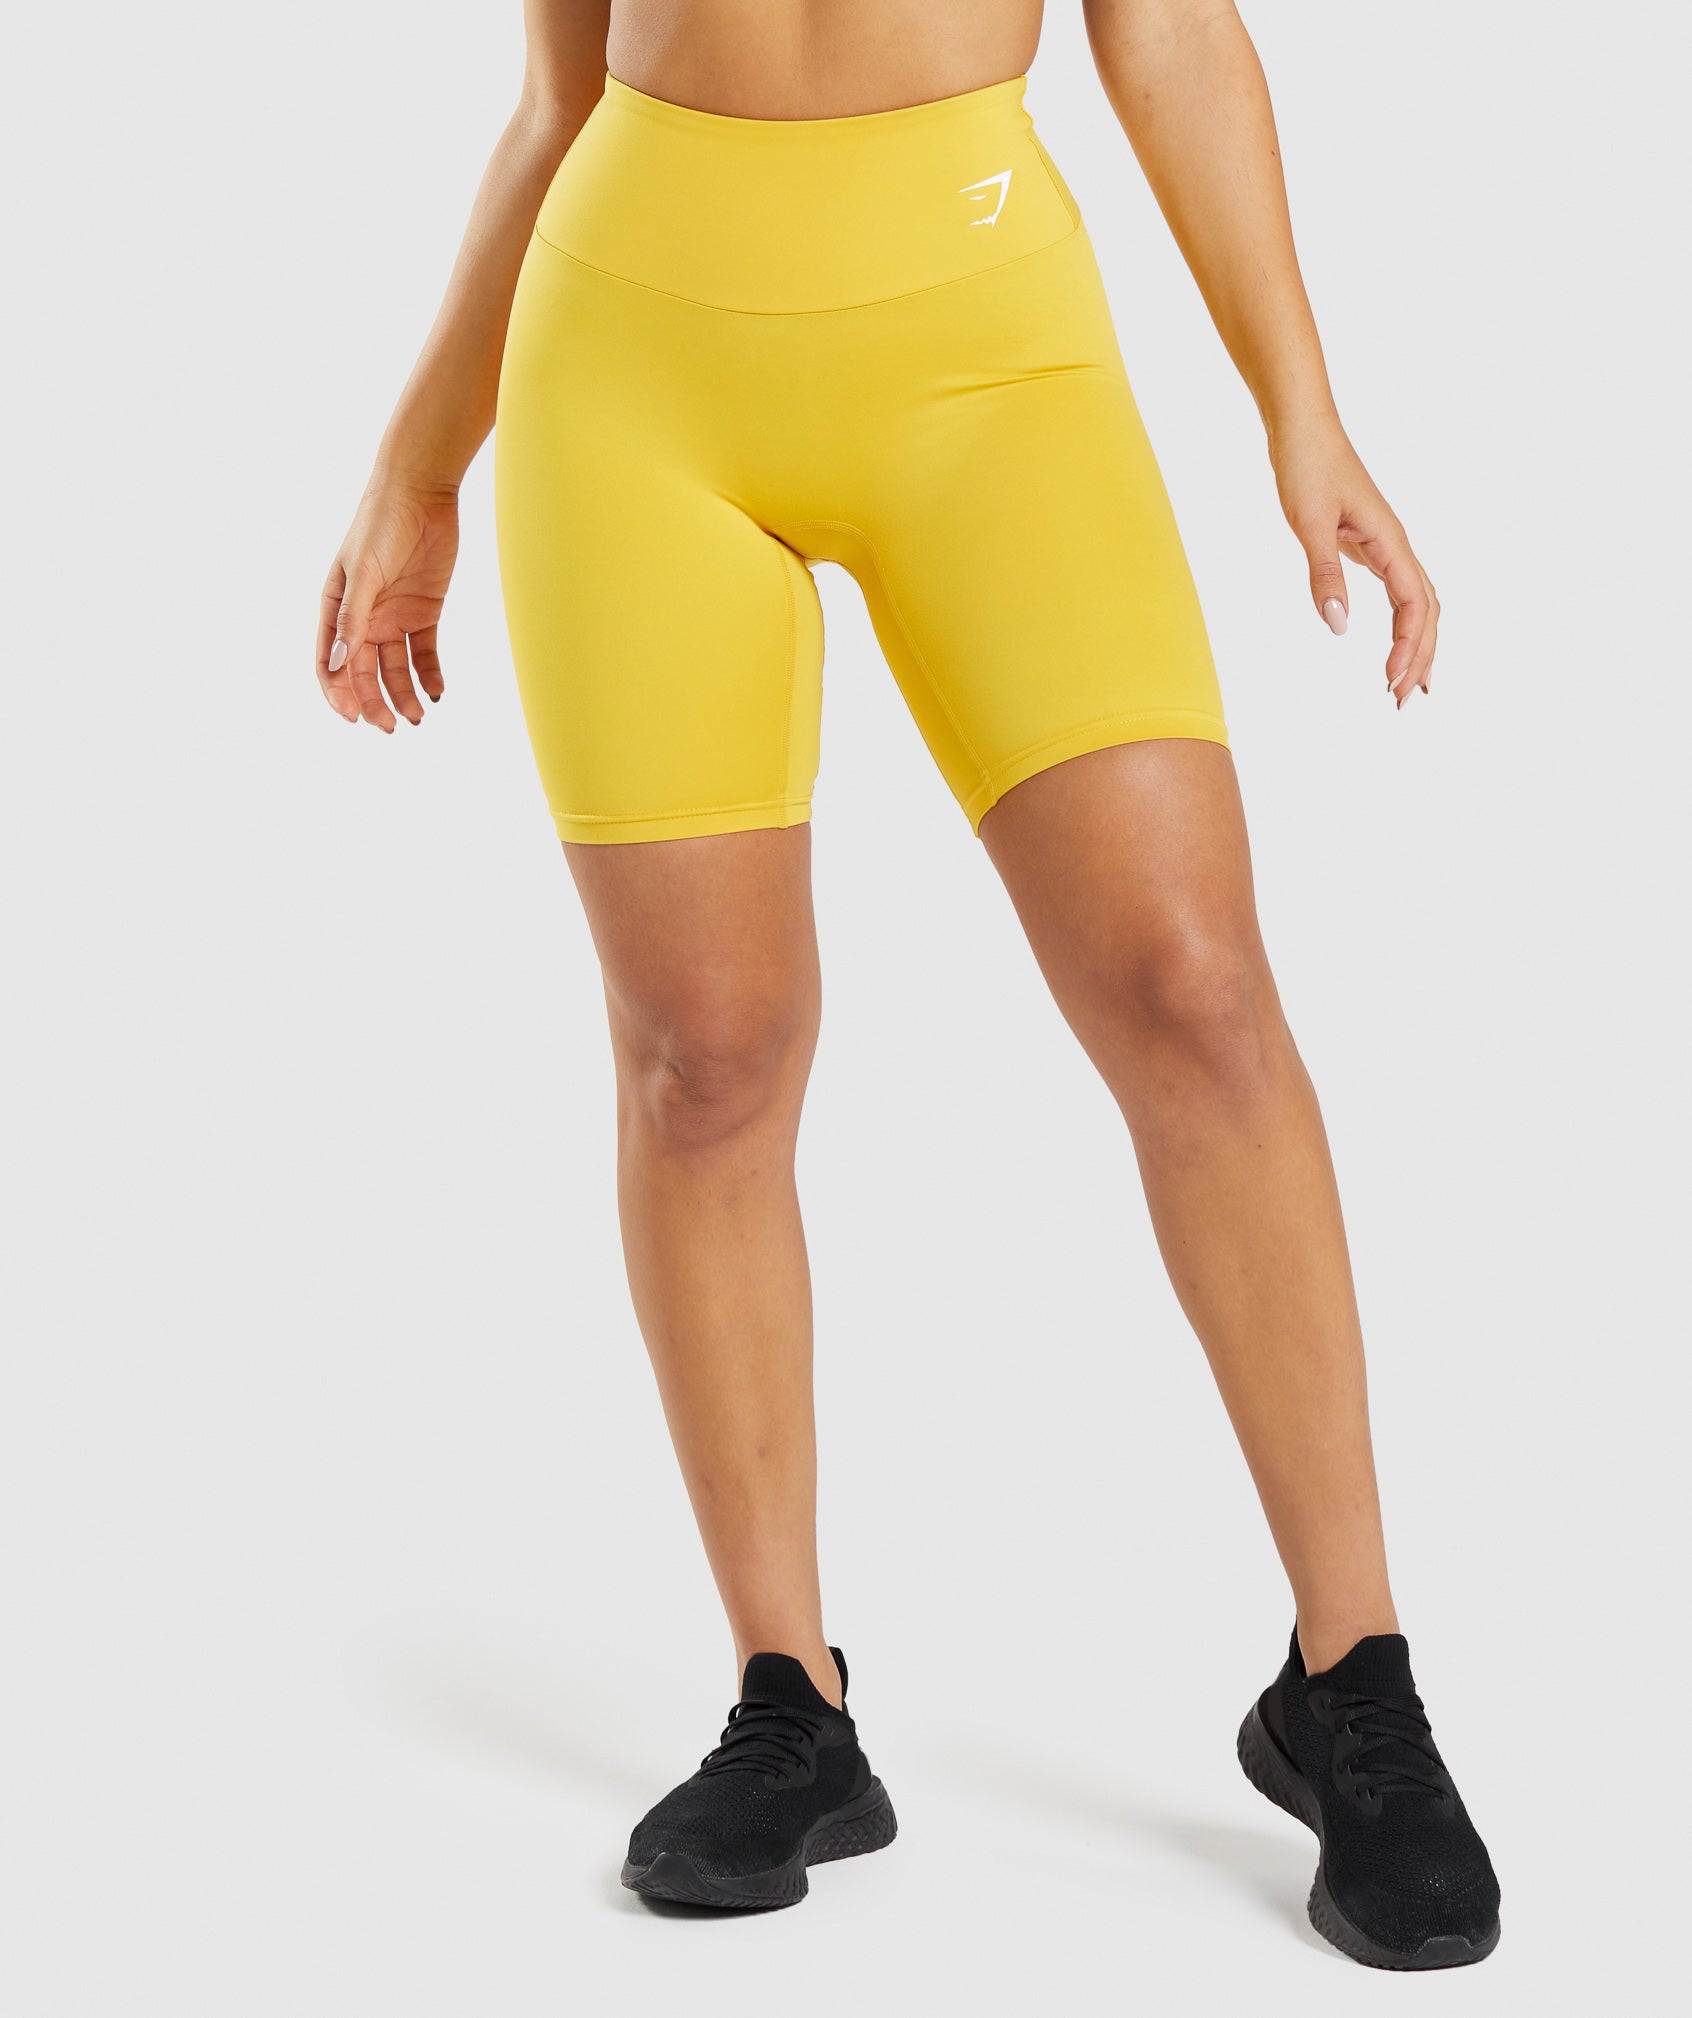 Adorna Shapparel Cycling Shorts for women with Thigh Shaping - Golden Yellow